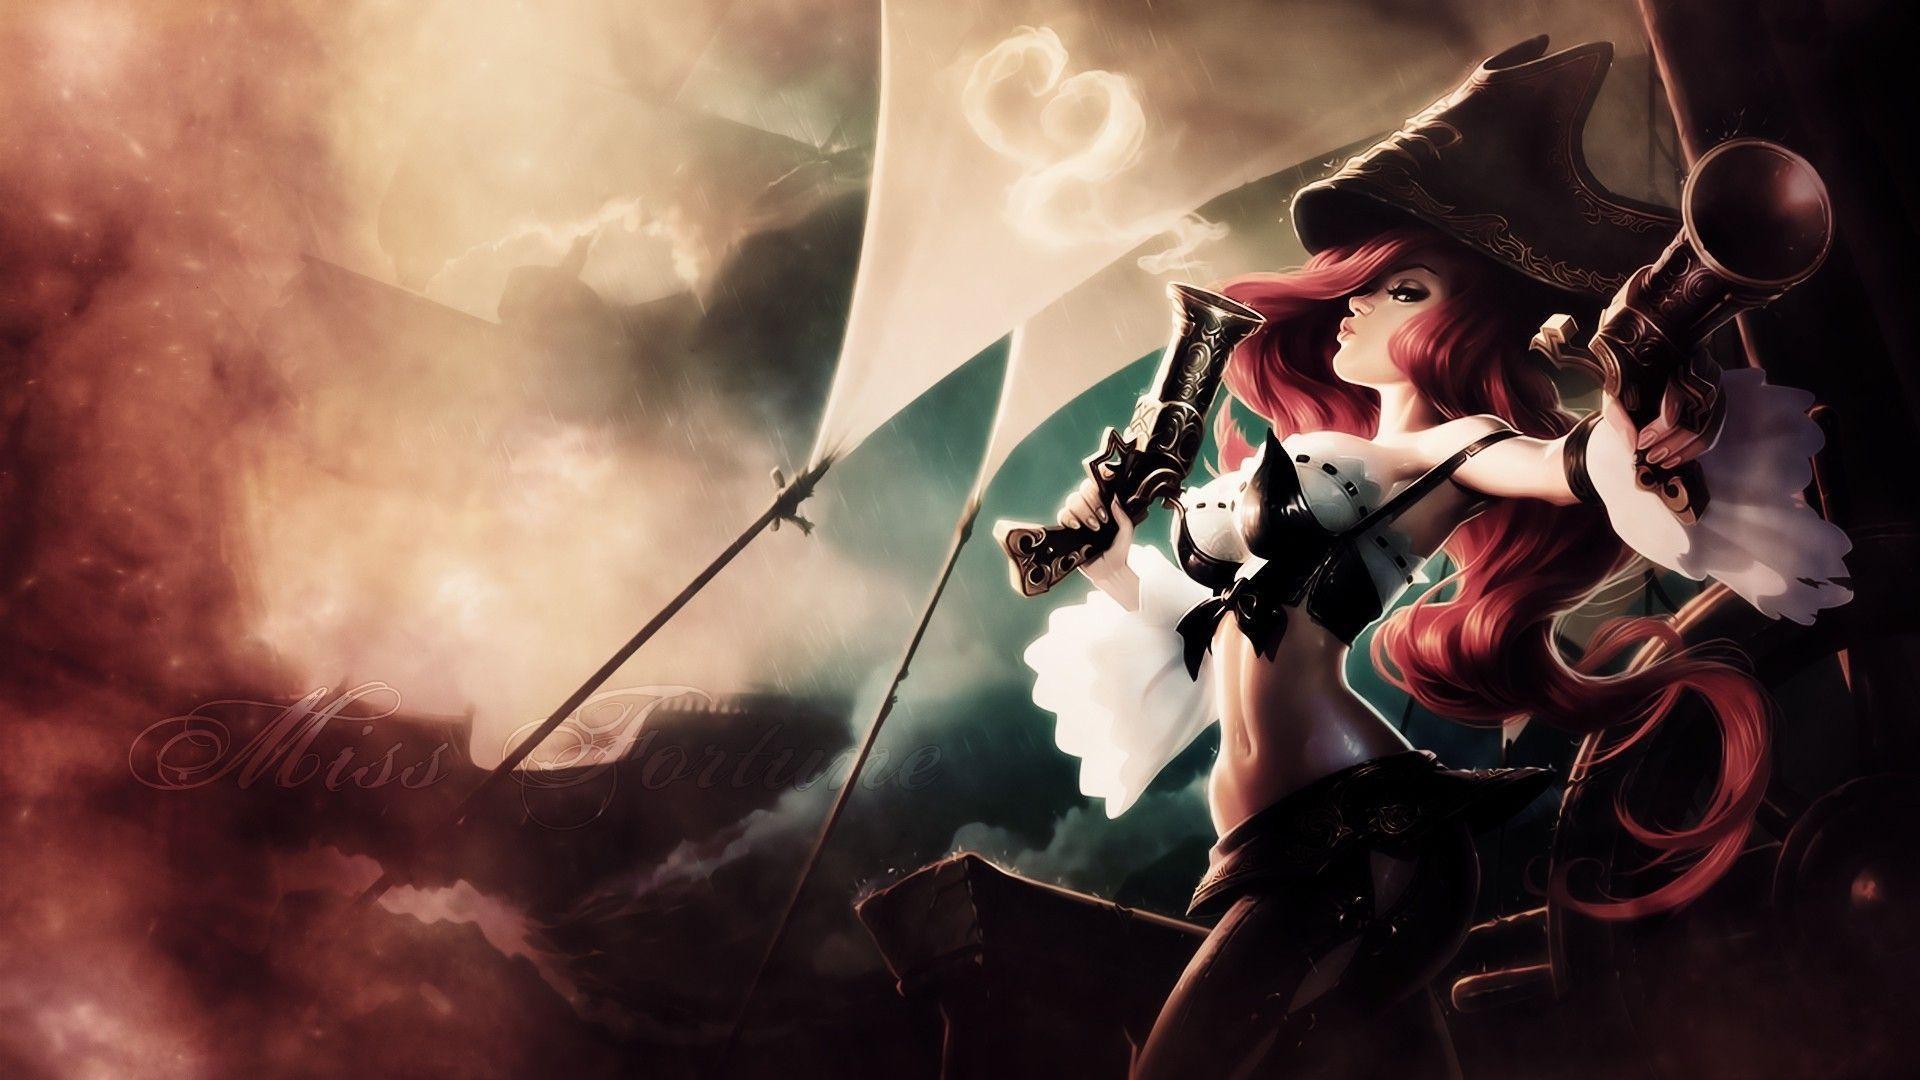 Miss Fortune in League of Legends Wallpaper Wide or HD. Games